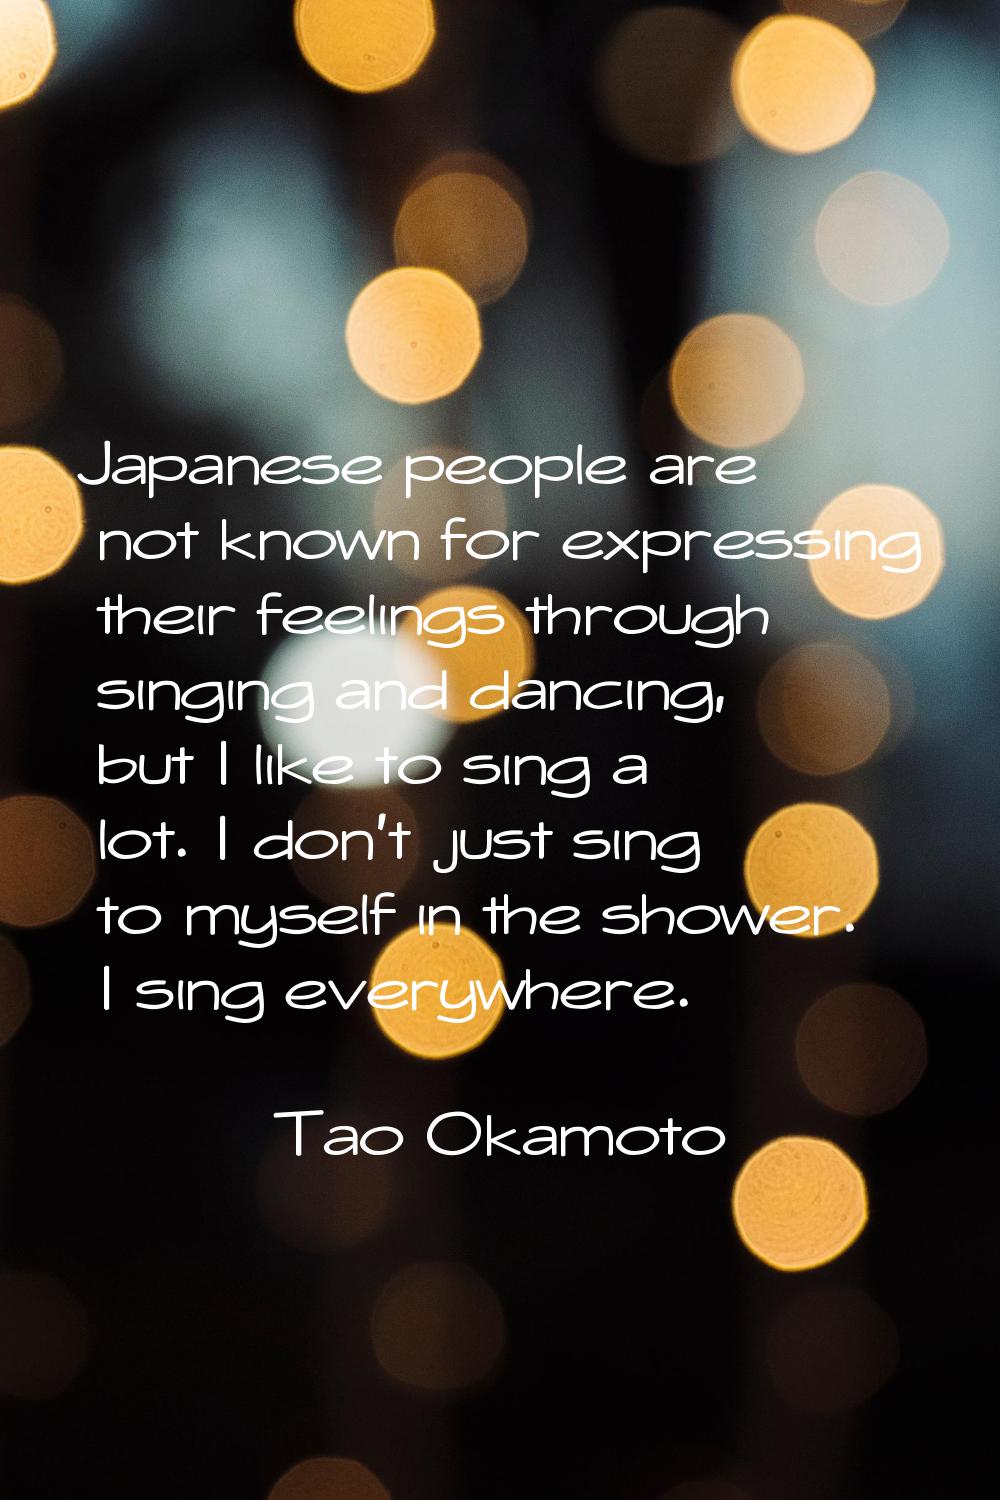 Japanese people are not known for expressing their feelings through singing and dancing, but I like